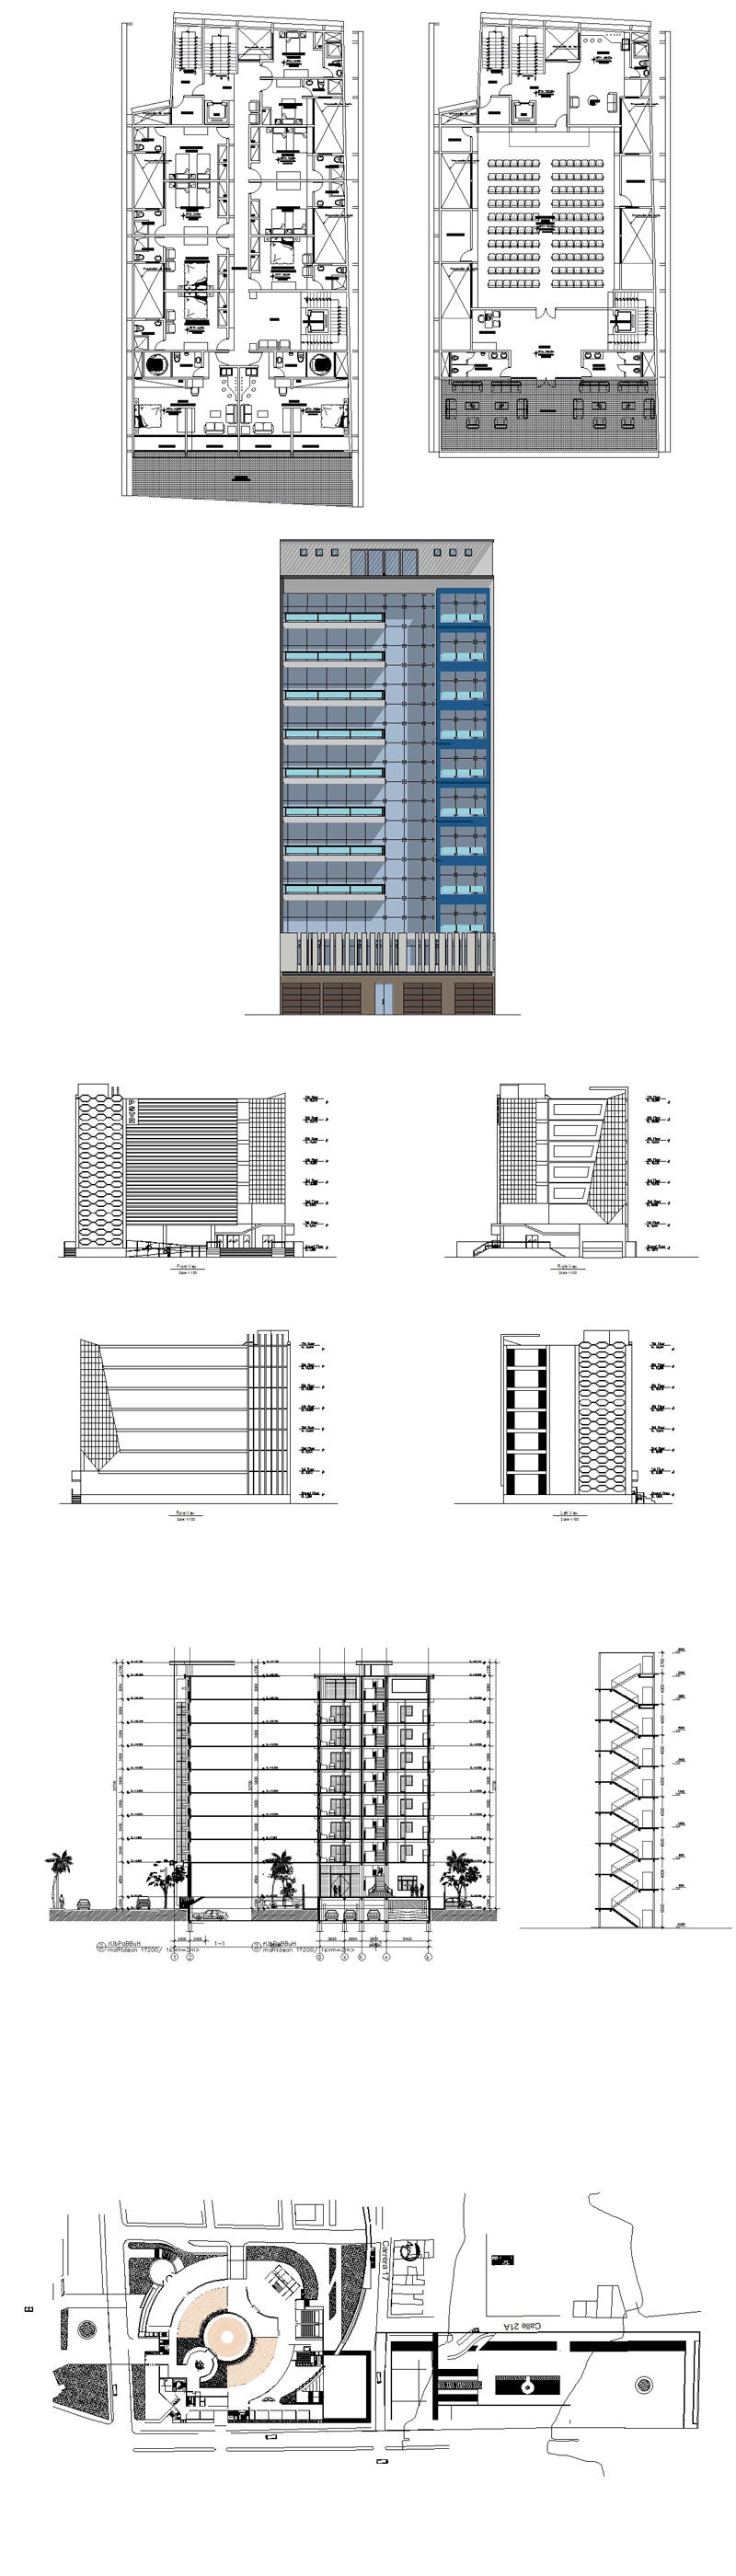 ★【Residential Building CAD Design Collection V.1】Layout,Lobby,Room design,Public facilities,Counter@Autocad Blocks,Drawings,CAD Details,Elevation